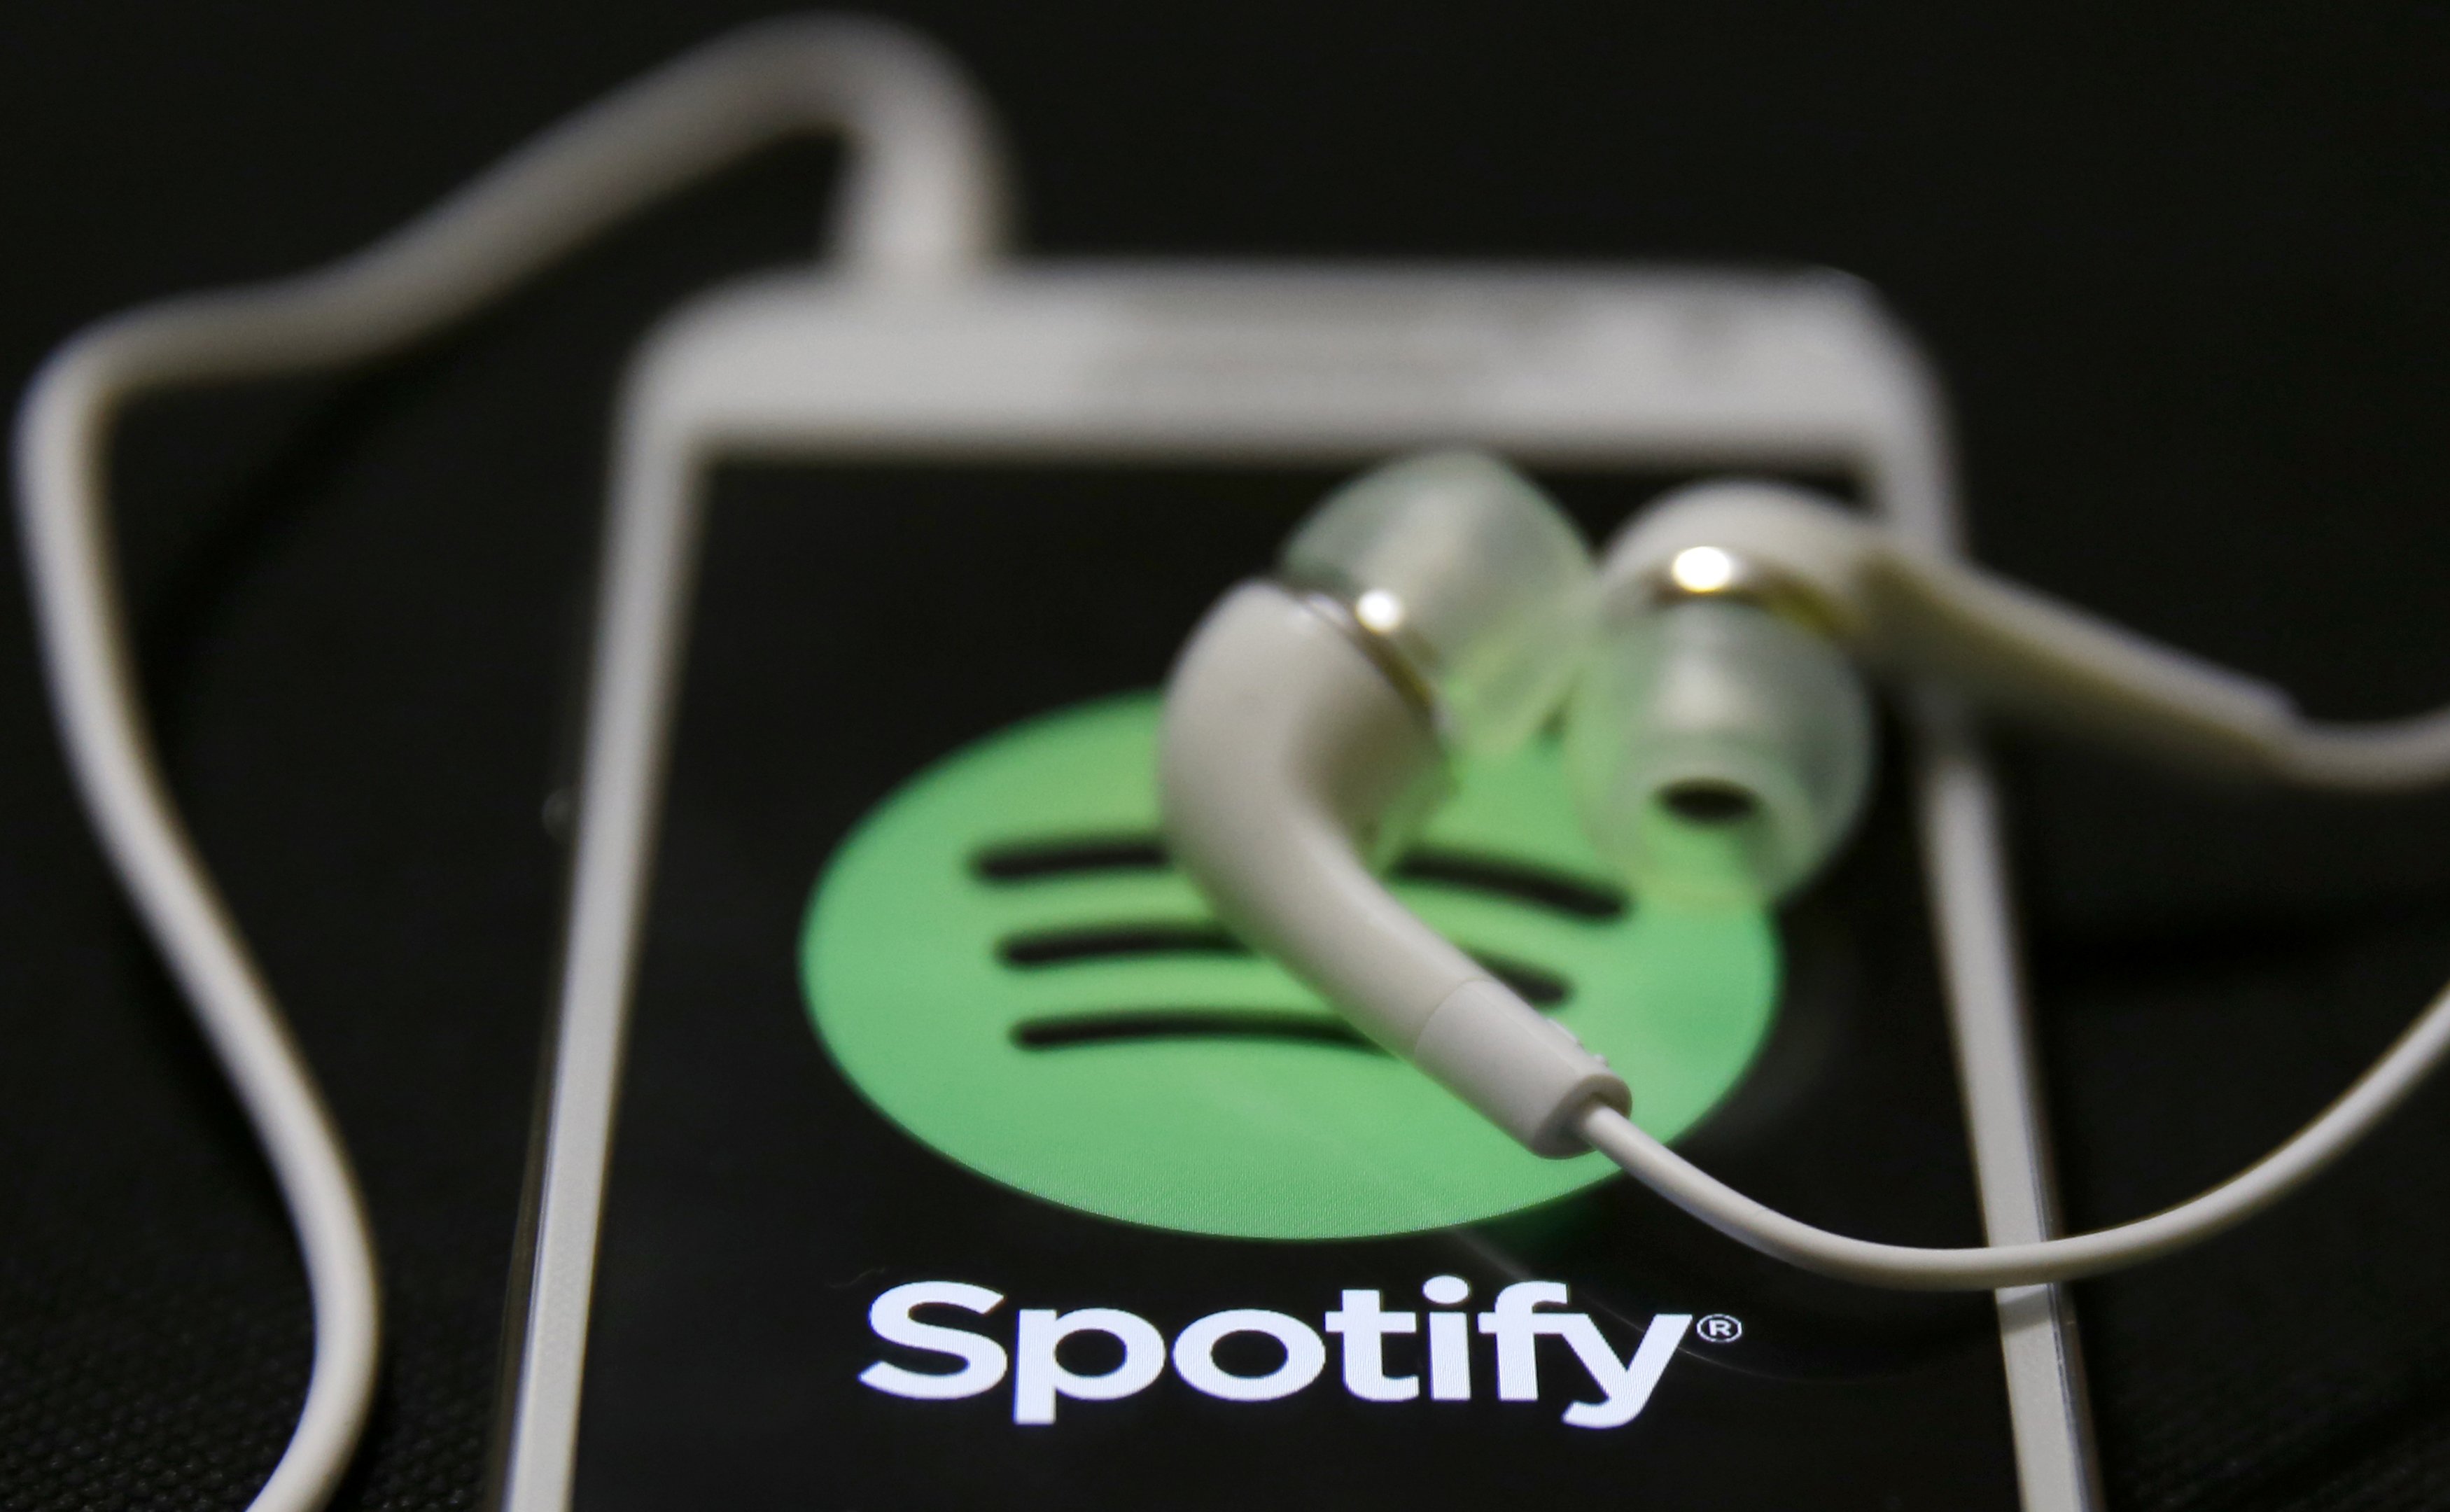 music streaming leader has agreed to set up a 43 45 million fund photo reuters